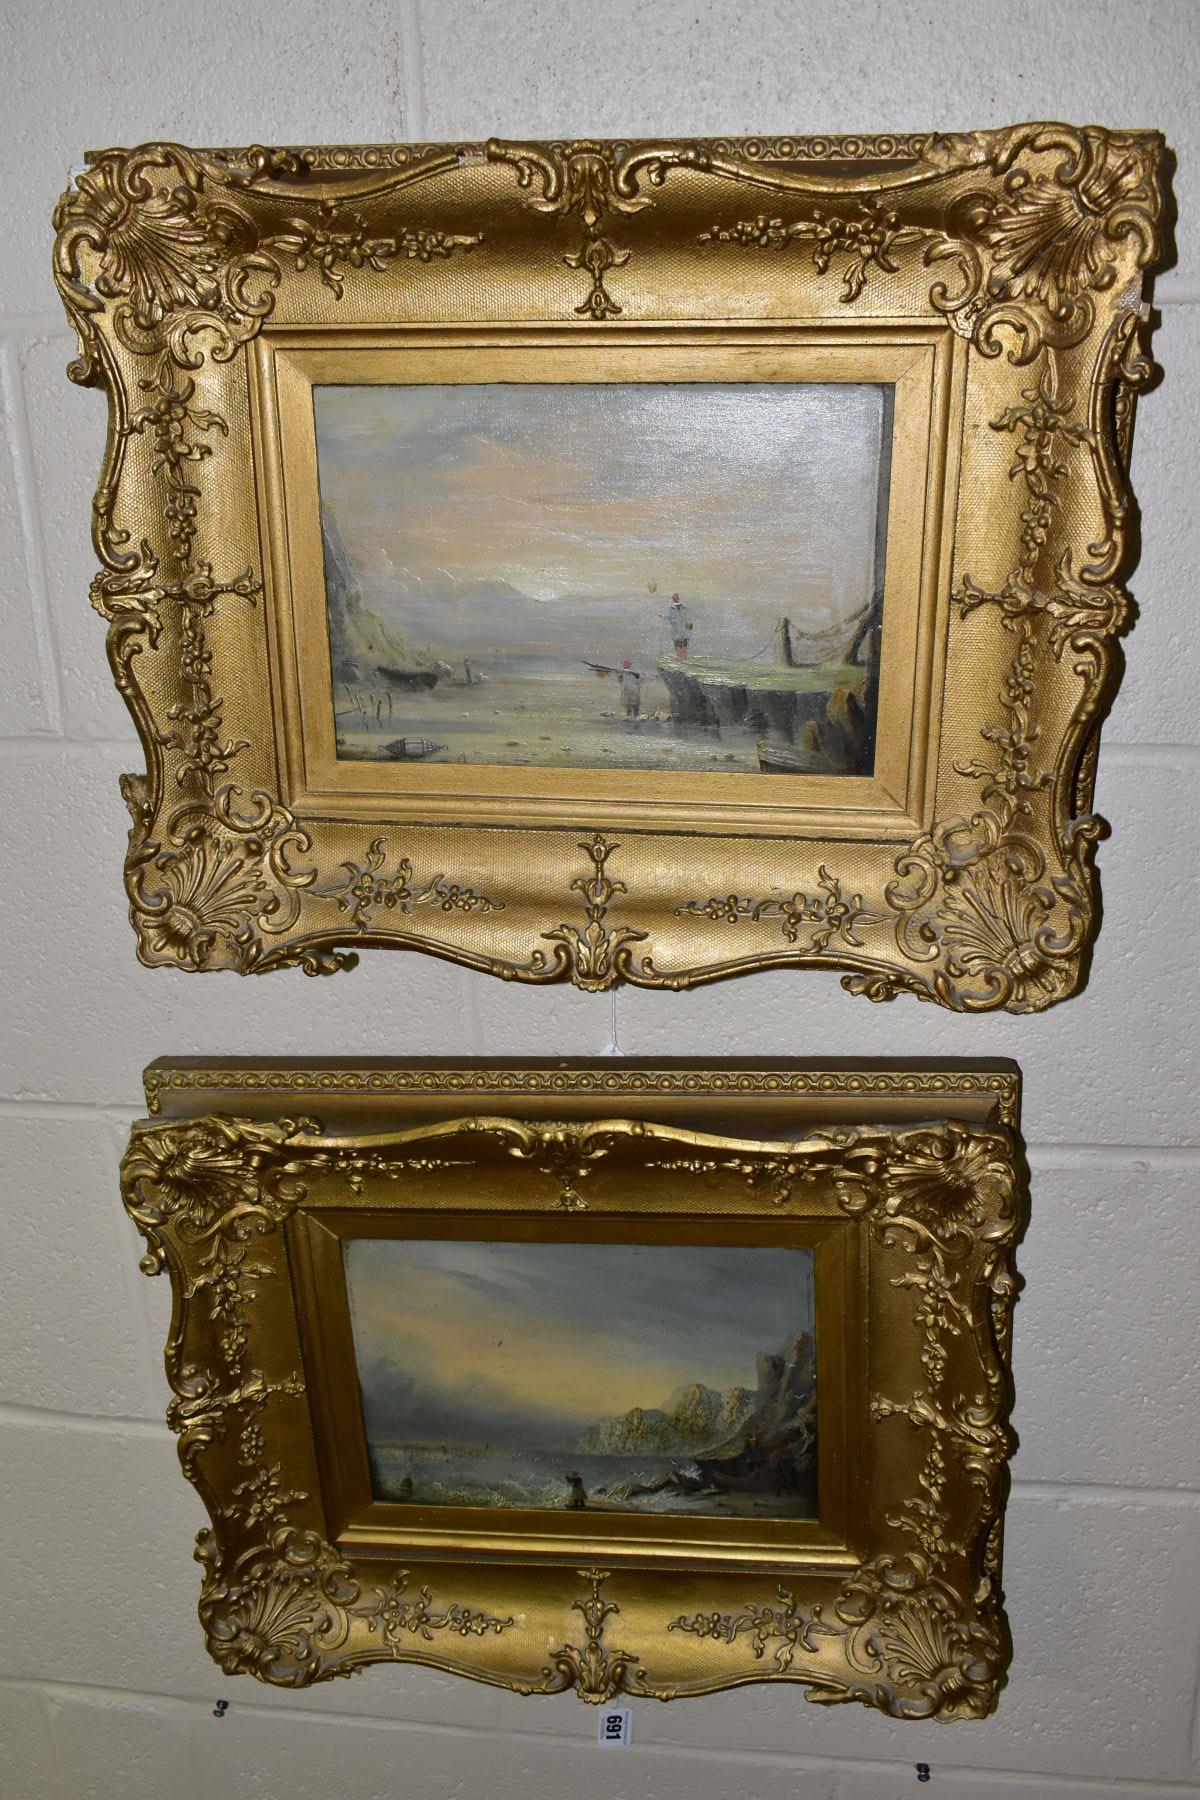 TWO UNSIGNED COASTAL LANDSCAPES CIRCA 1828-1839, possibly depicting fisherman at sunrise and sunset,